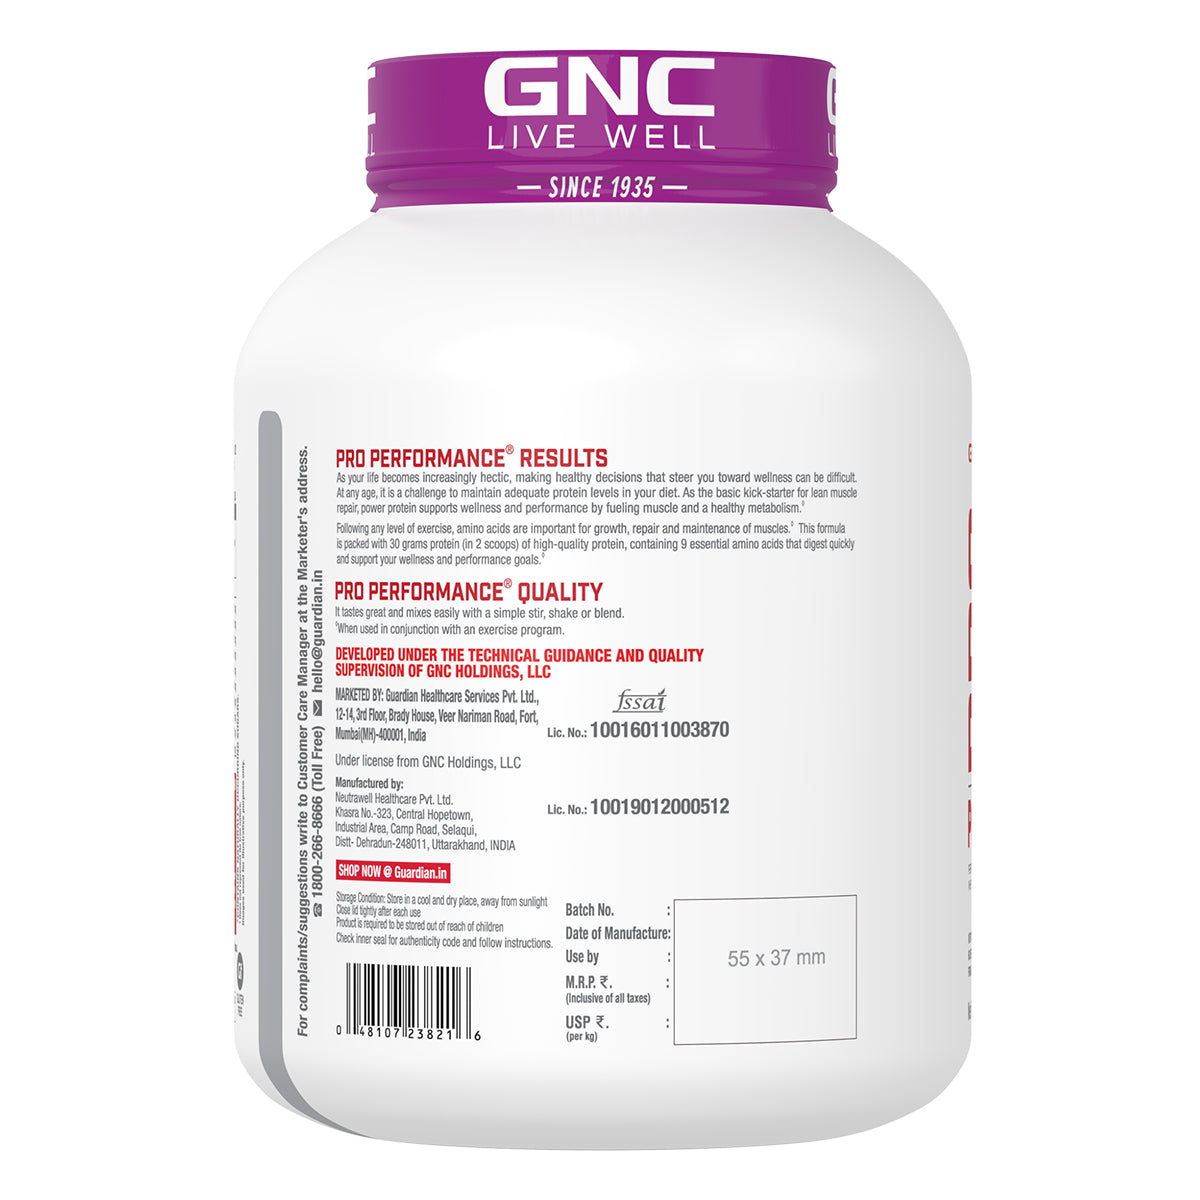 GNC Pro Performance Power Protein  - Clearance Sale - 6-in-1 Stack for Increased Strength, Recovery & Muscle Mass | Informed Choice Certified